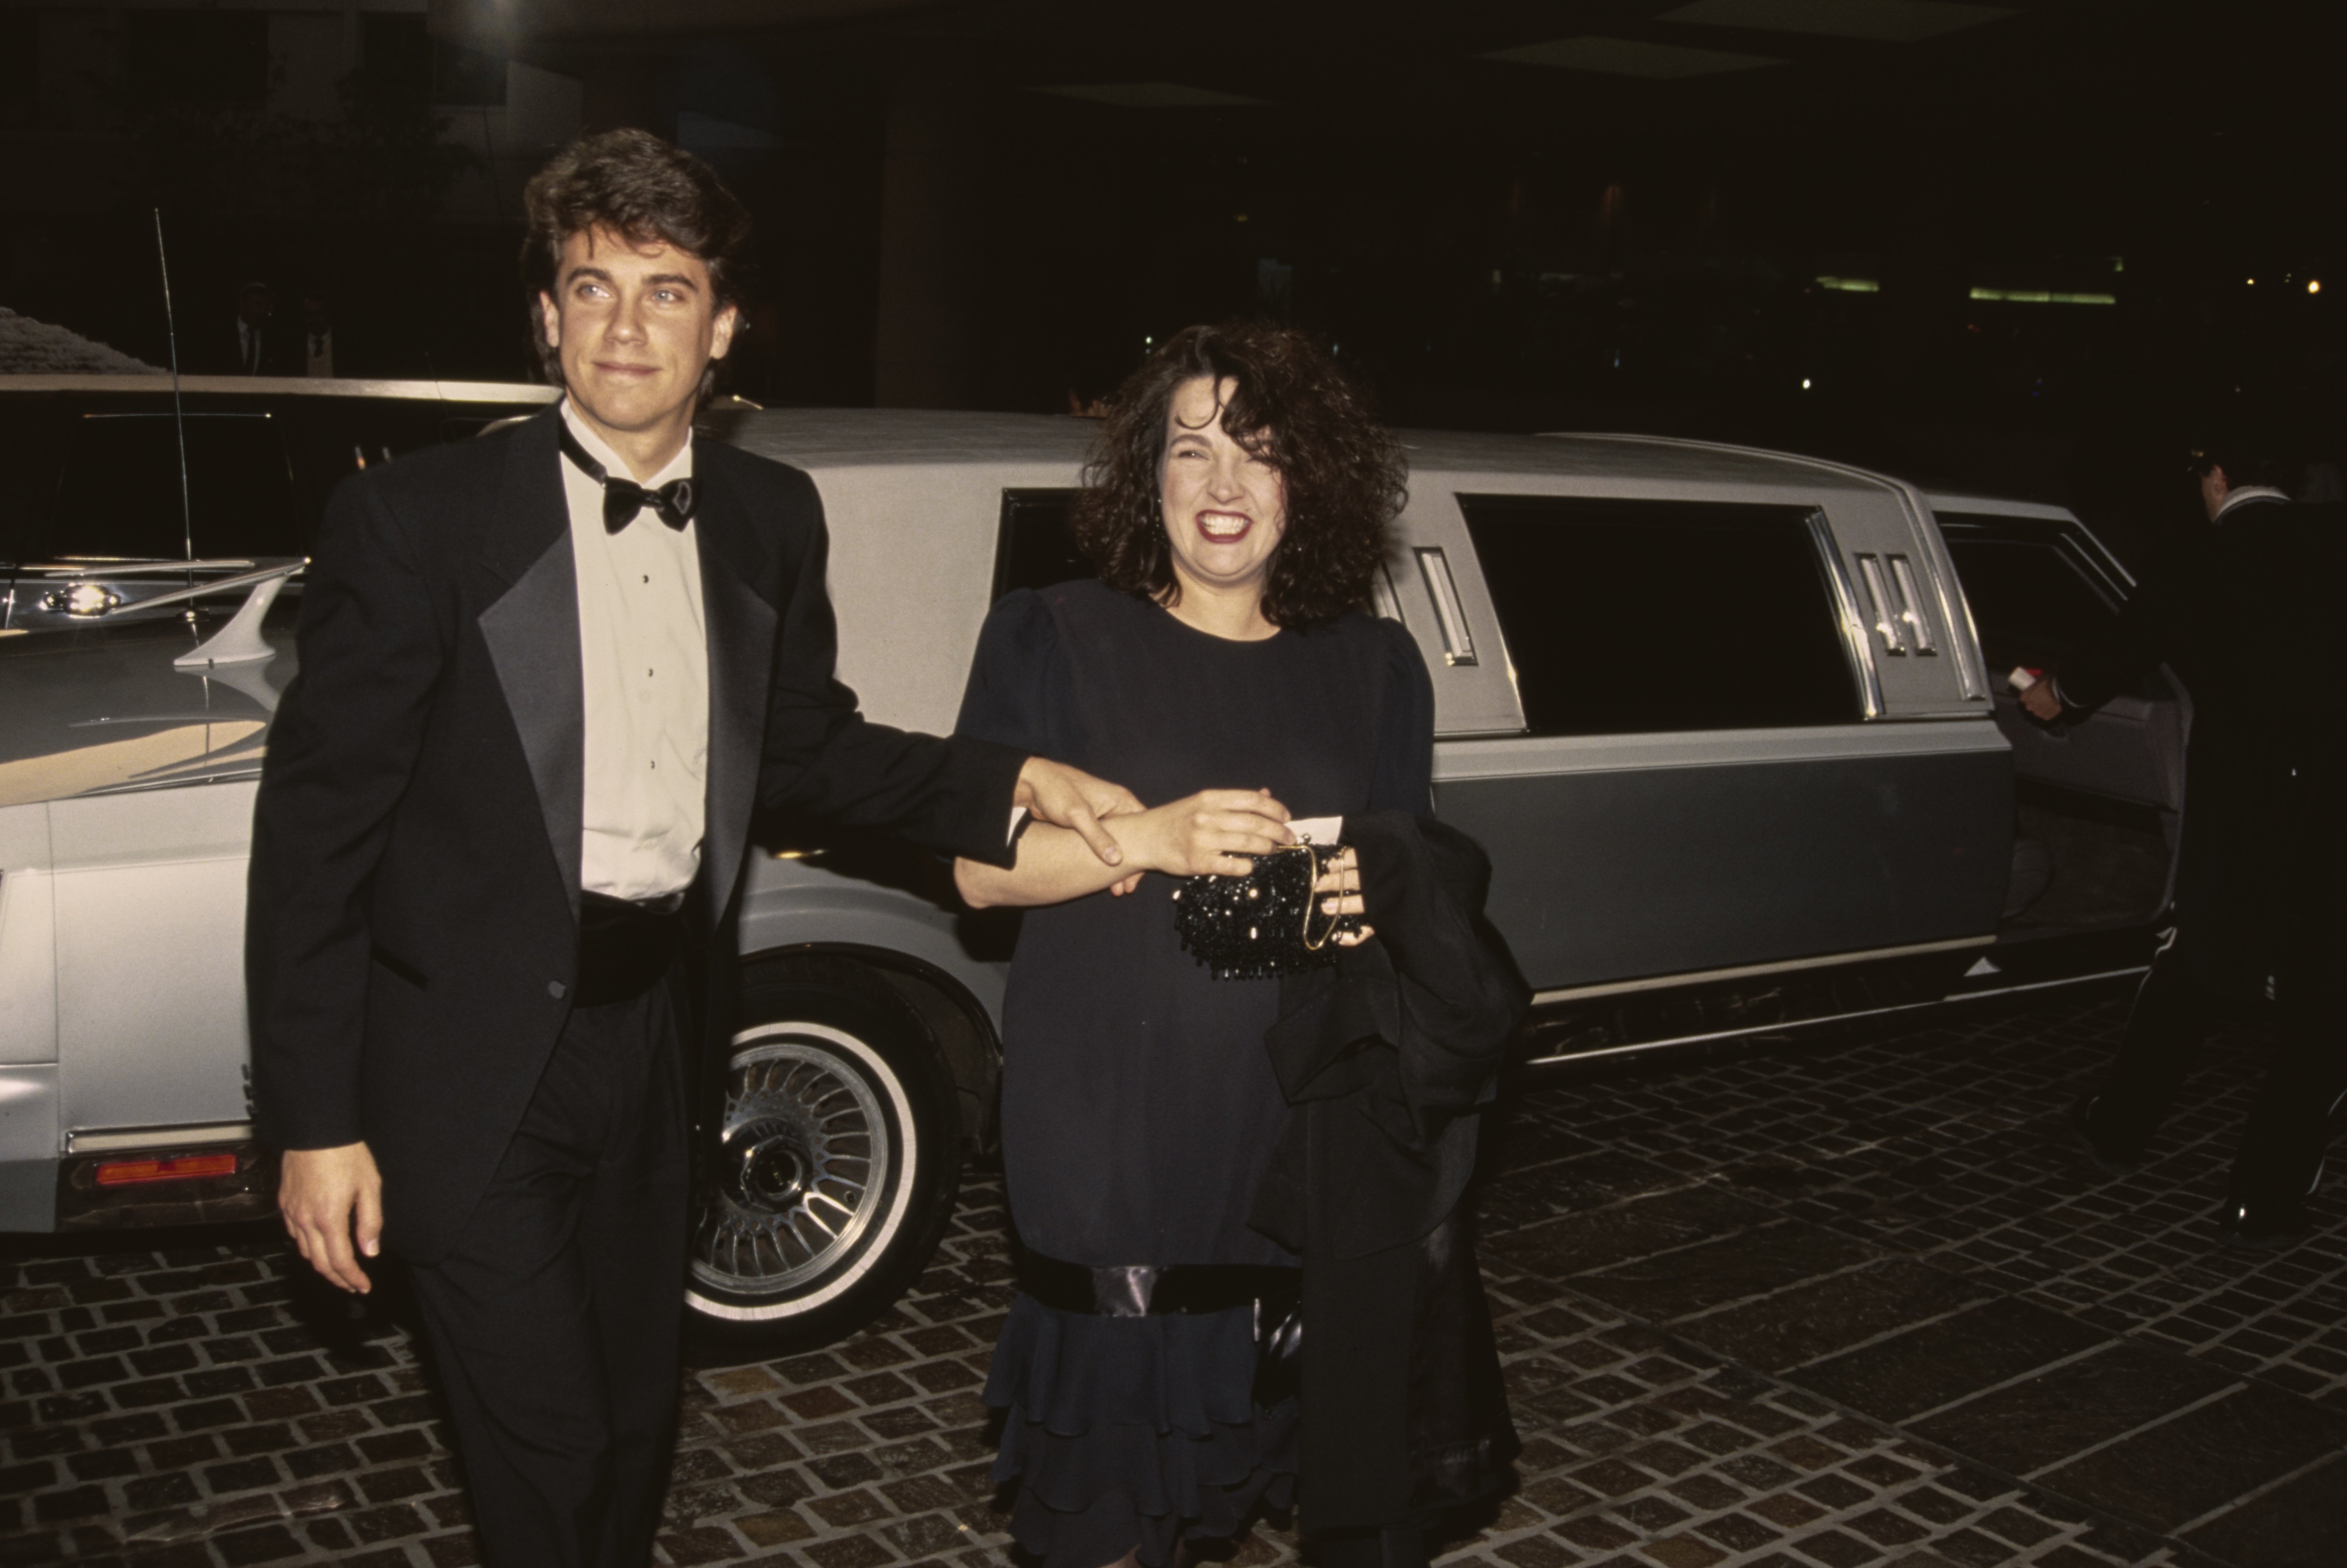 Robby Benson and Karla DeVito at the Beverly Hilton Hotel in Beverly Hills, California, 18th January 1992 | Source: Getty Images